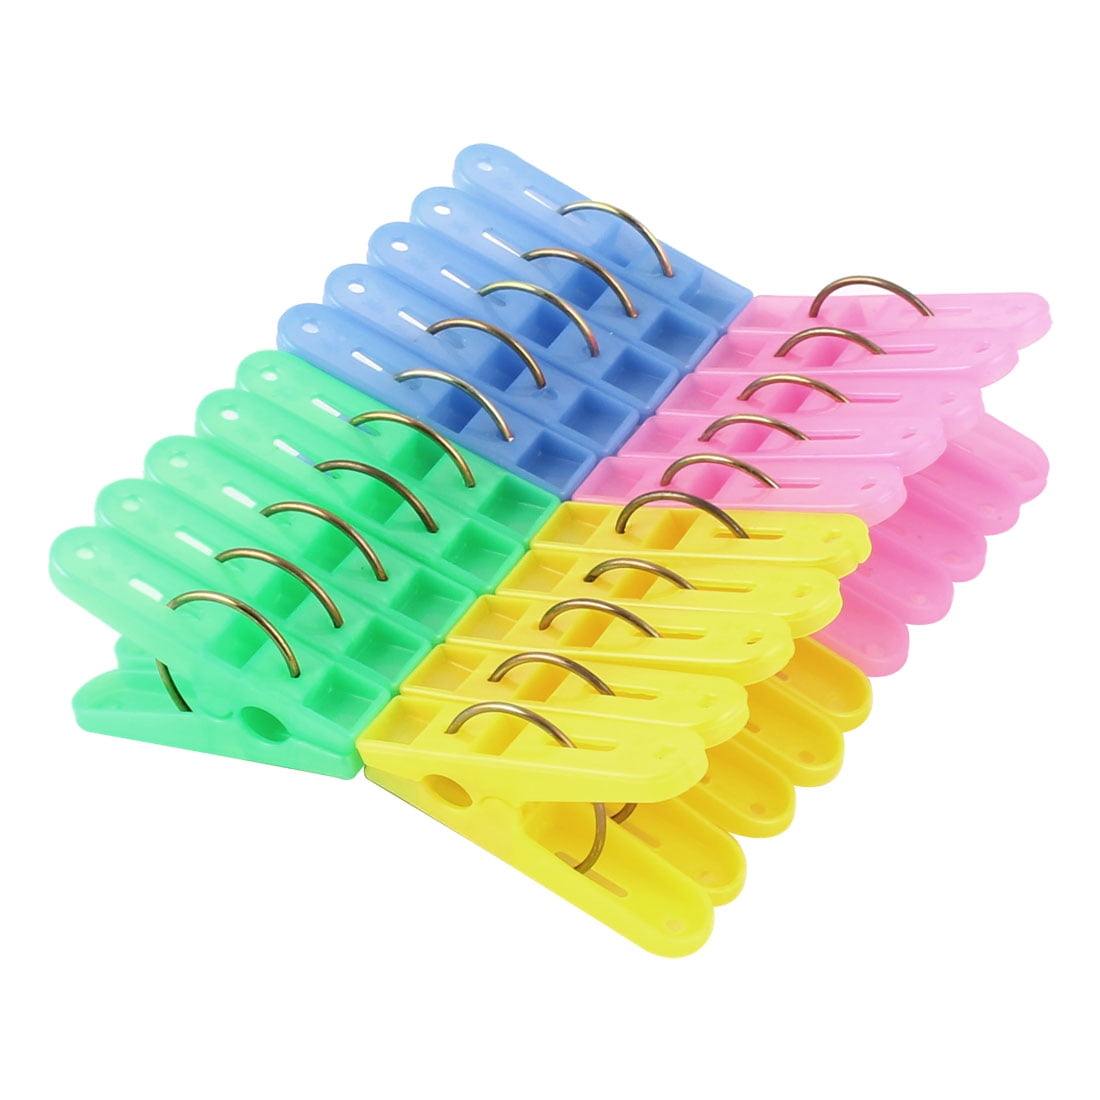 Plastic Laundry Clothes Drying Pegs Clips Pins Clothespins Assorted Color 20pcs